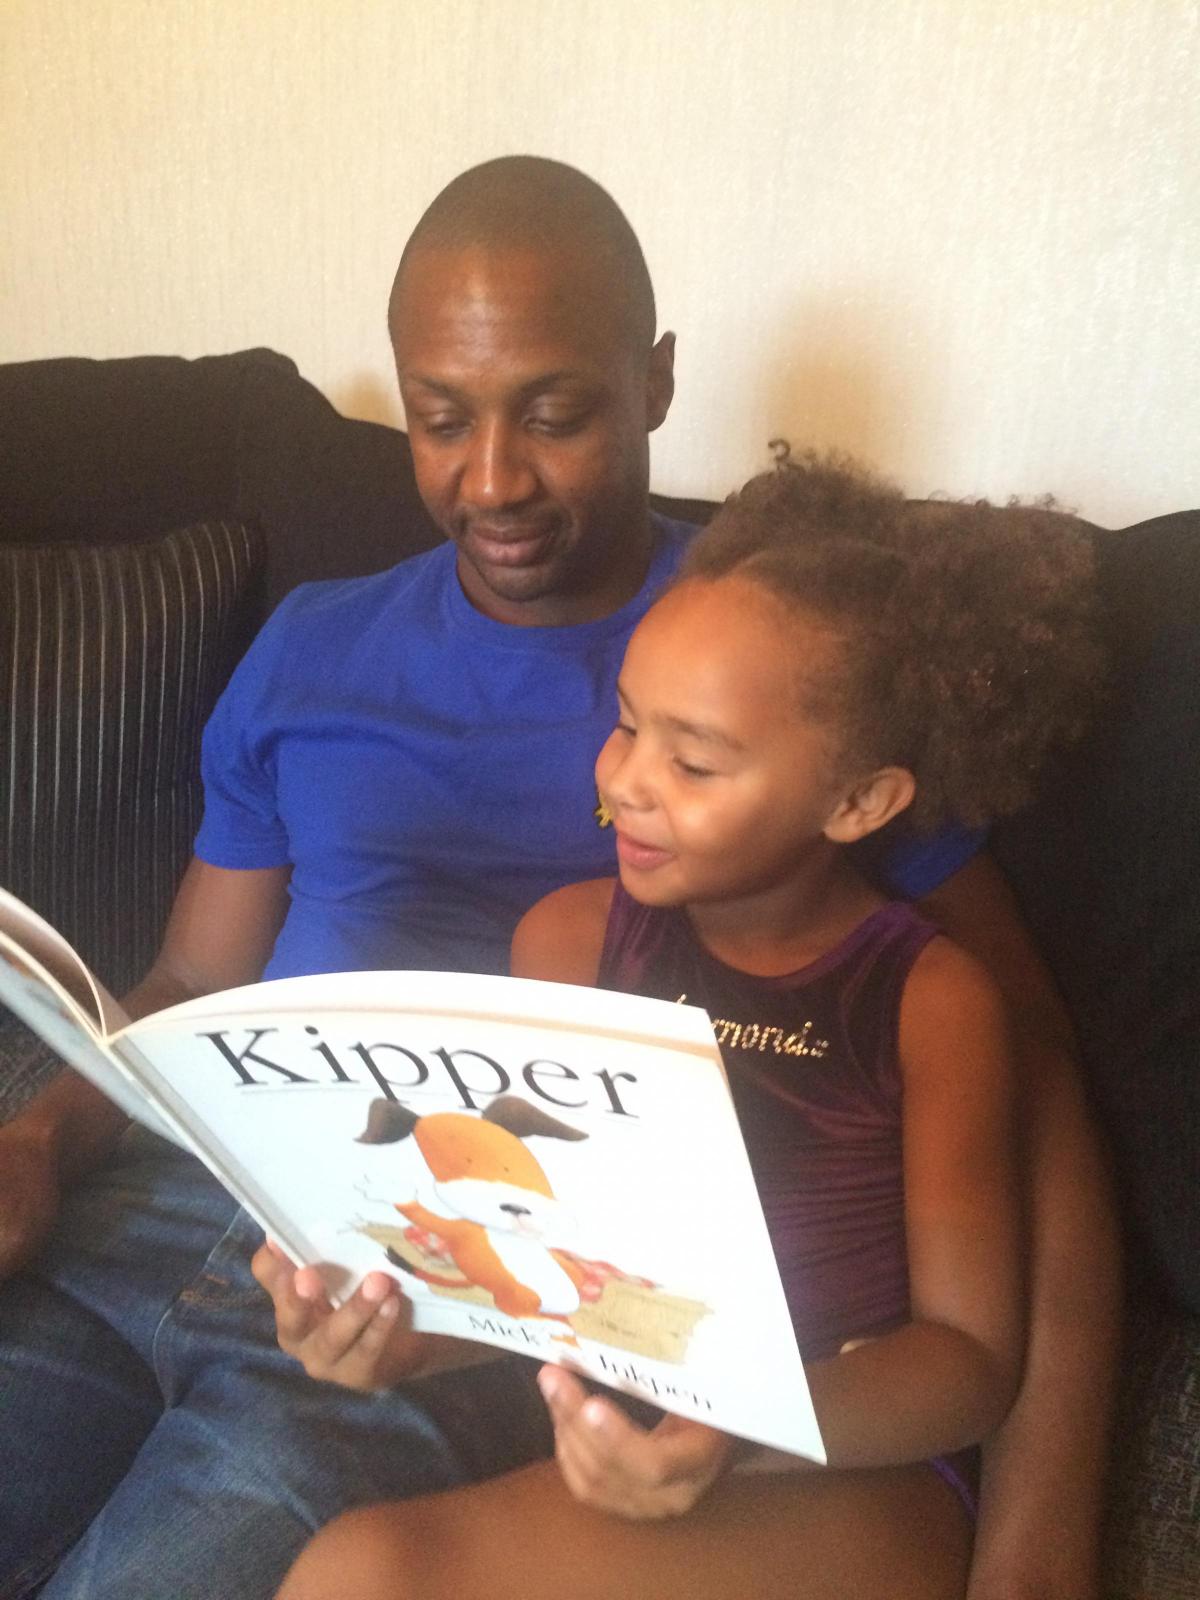 Paul Bulgin reading to his daughter, Milana, aged 6. Their favourite book is Kipper by Mick Inkpen